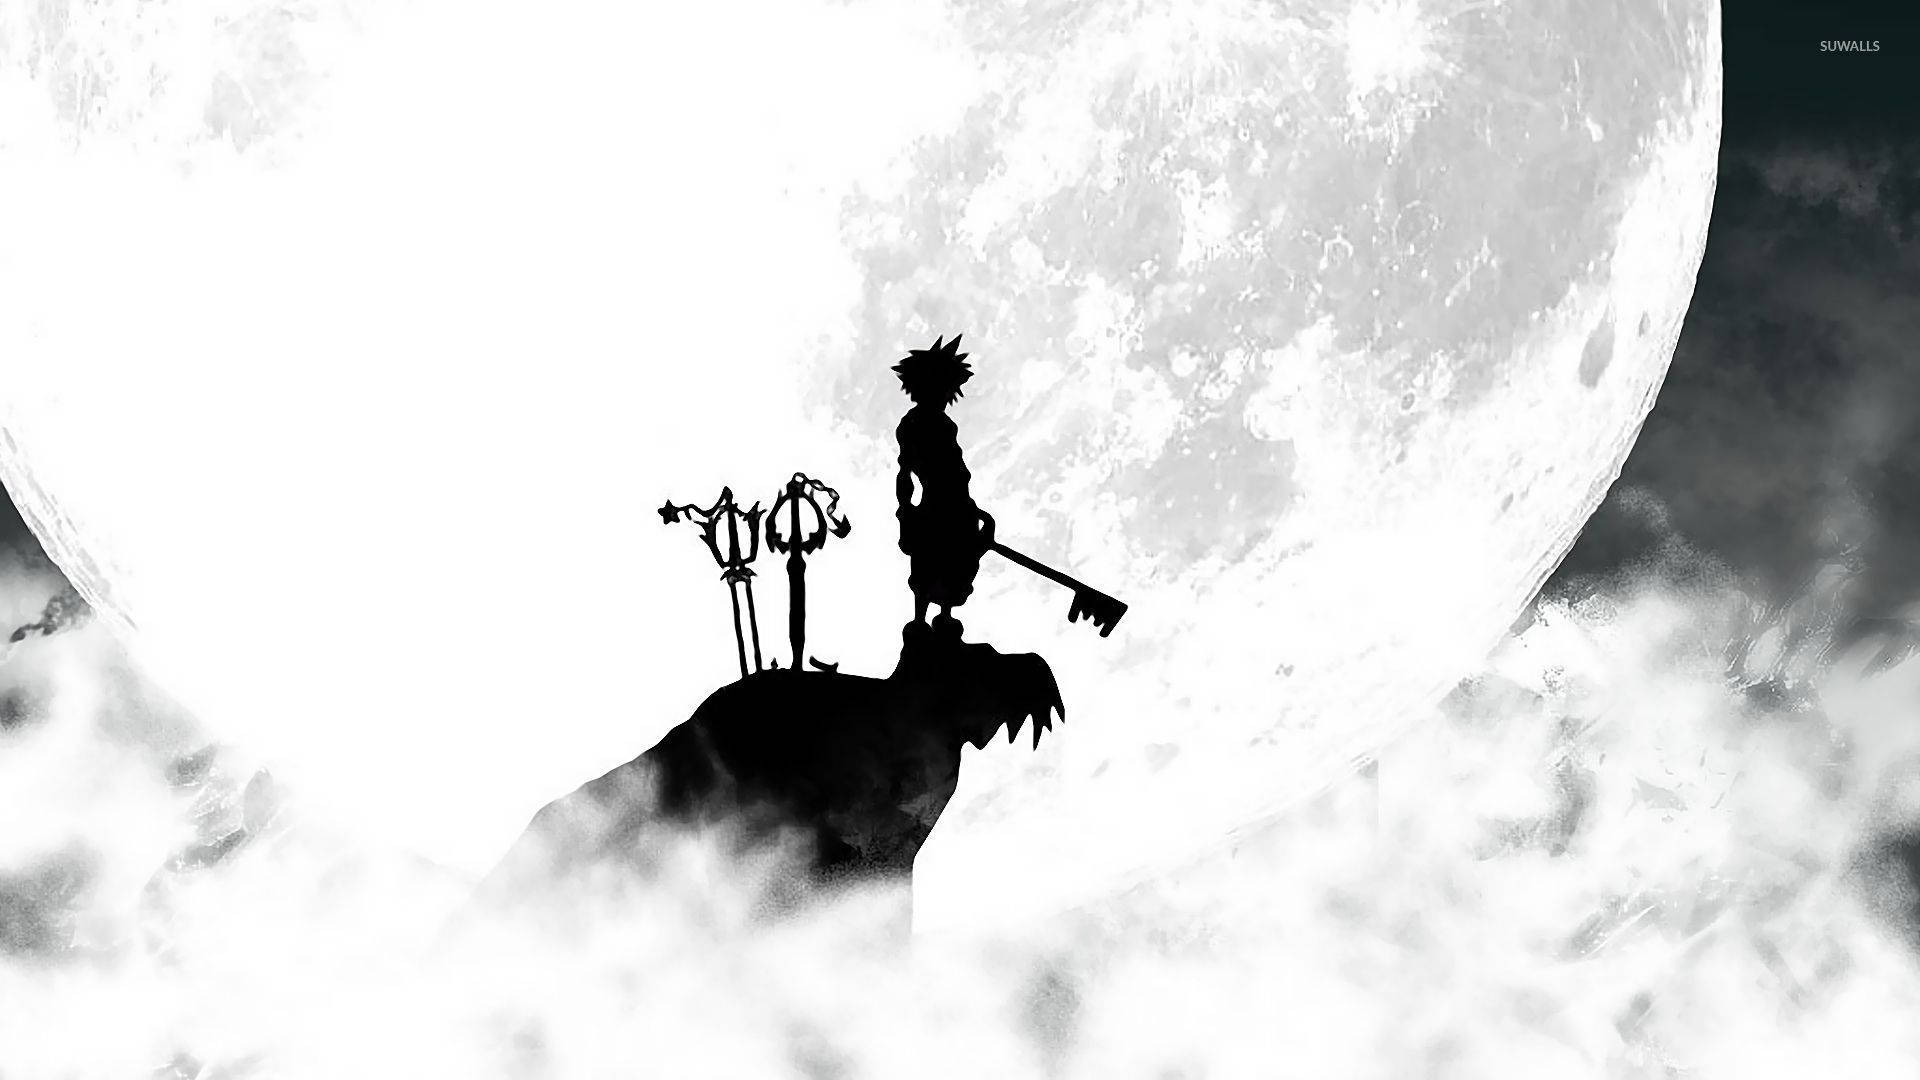 Kingdom Hearts 3 Warrior On The Cliff Wallpaper - Game Wallpaper